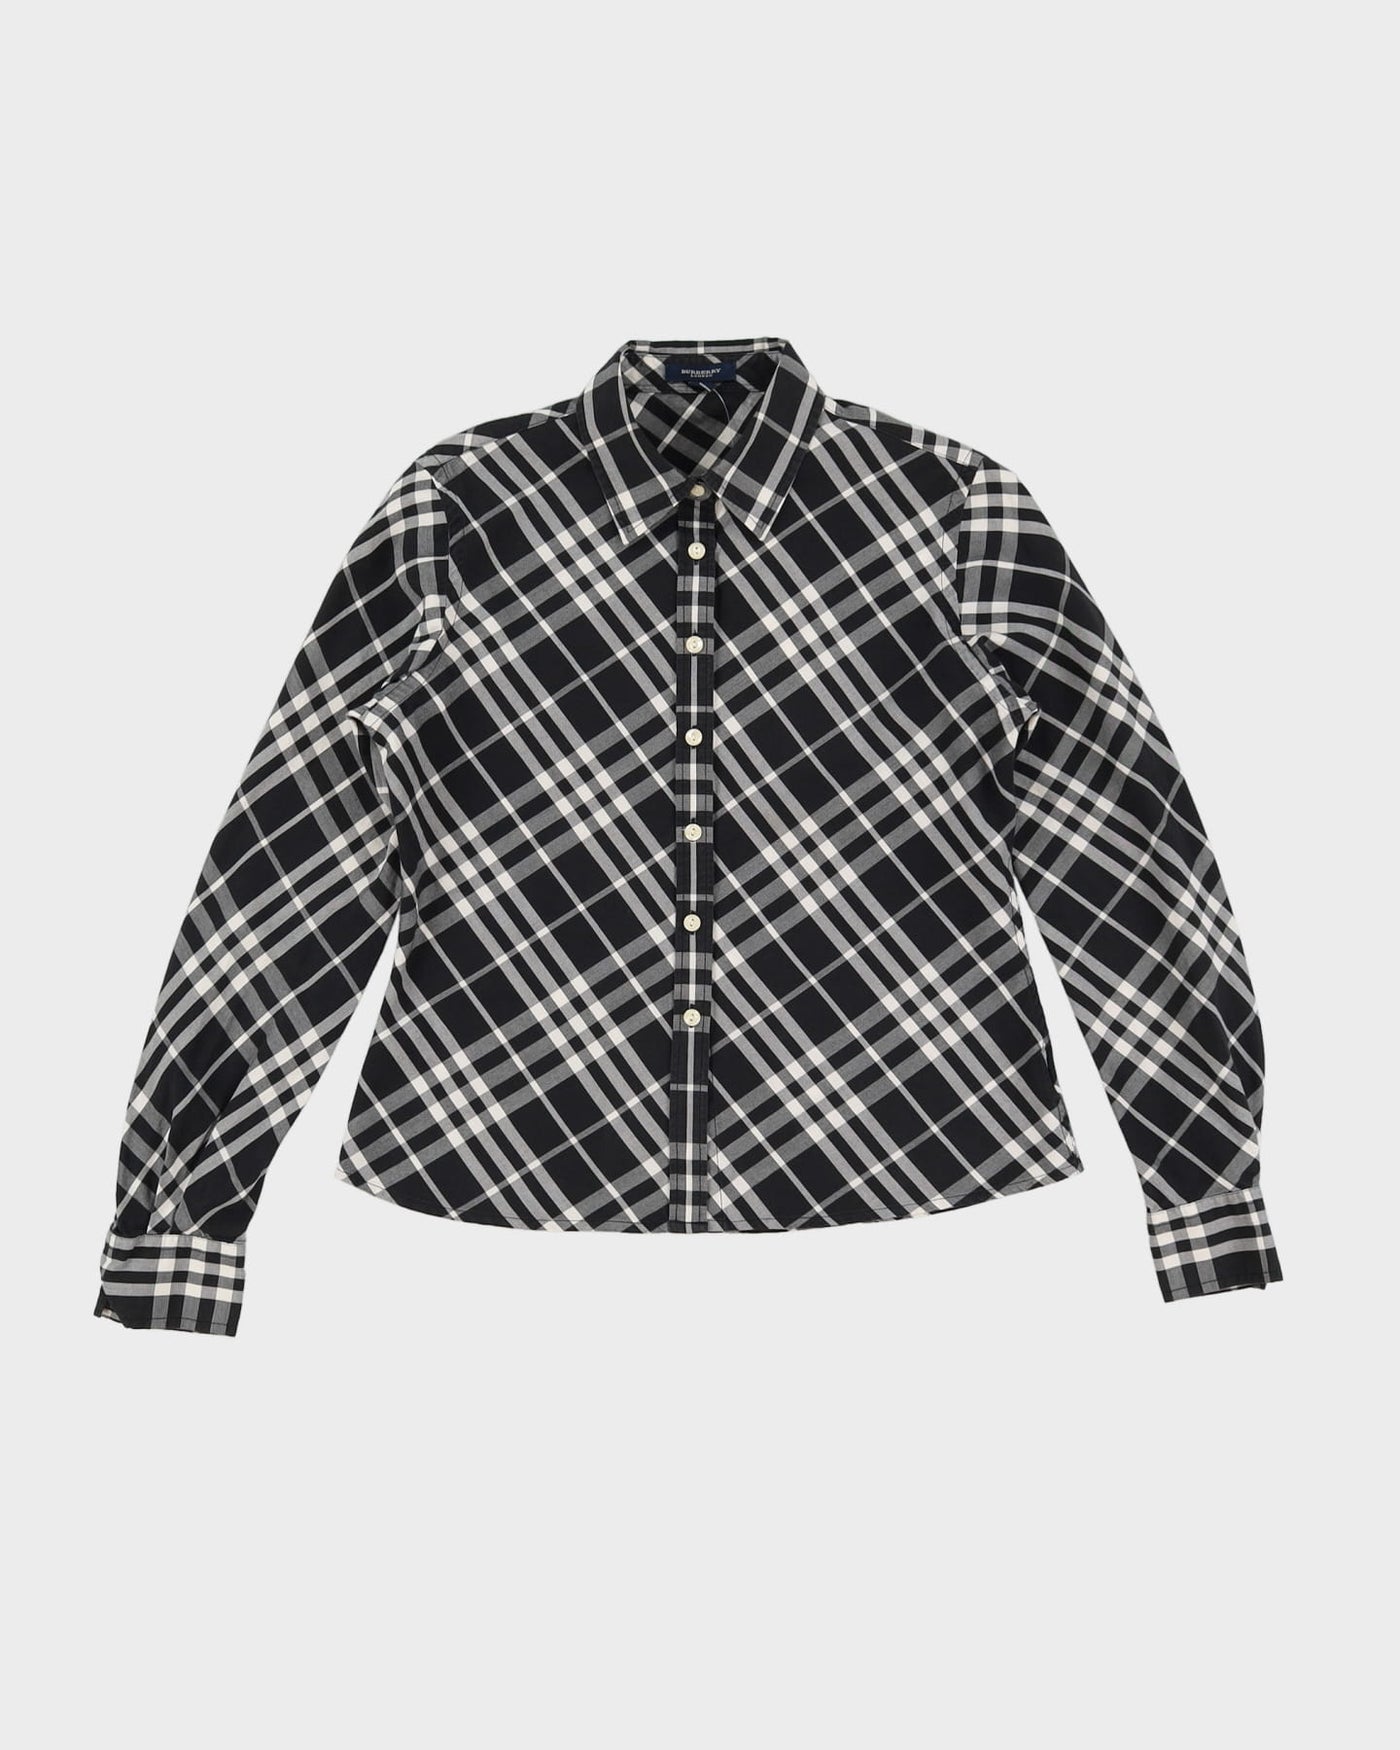 Burberry London Black Checked Blouse - S